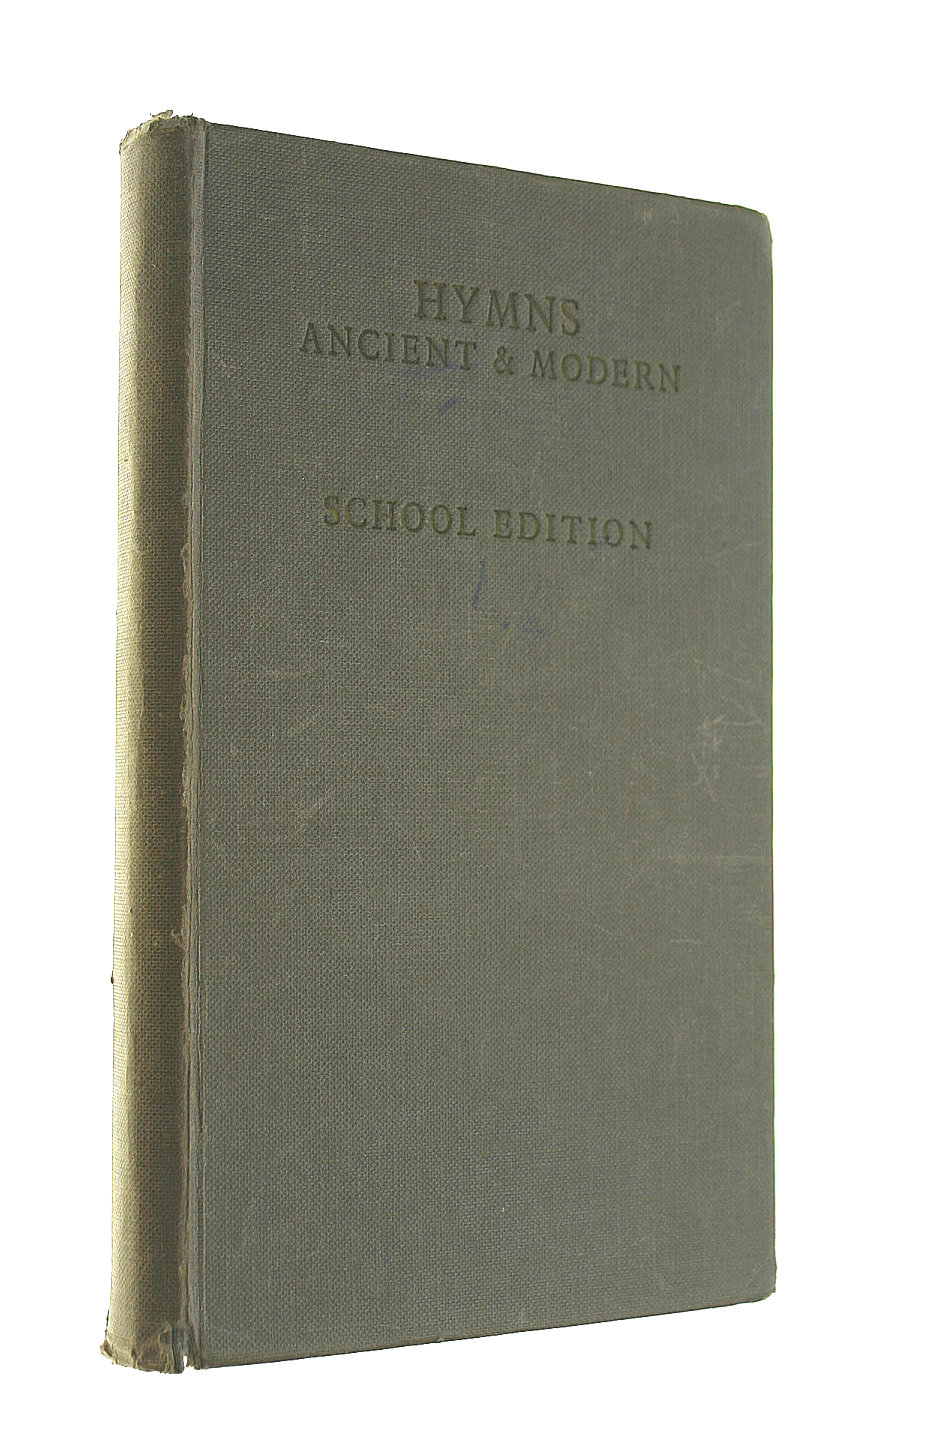 VARIOUS - Hymns Ancient & Modern School Edition With Daily Services